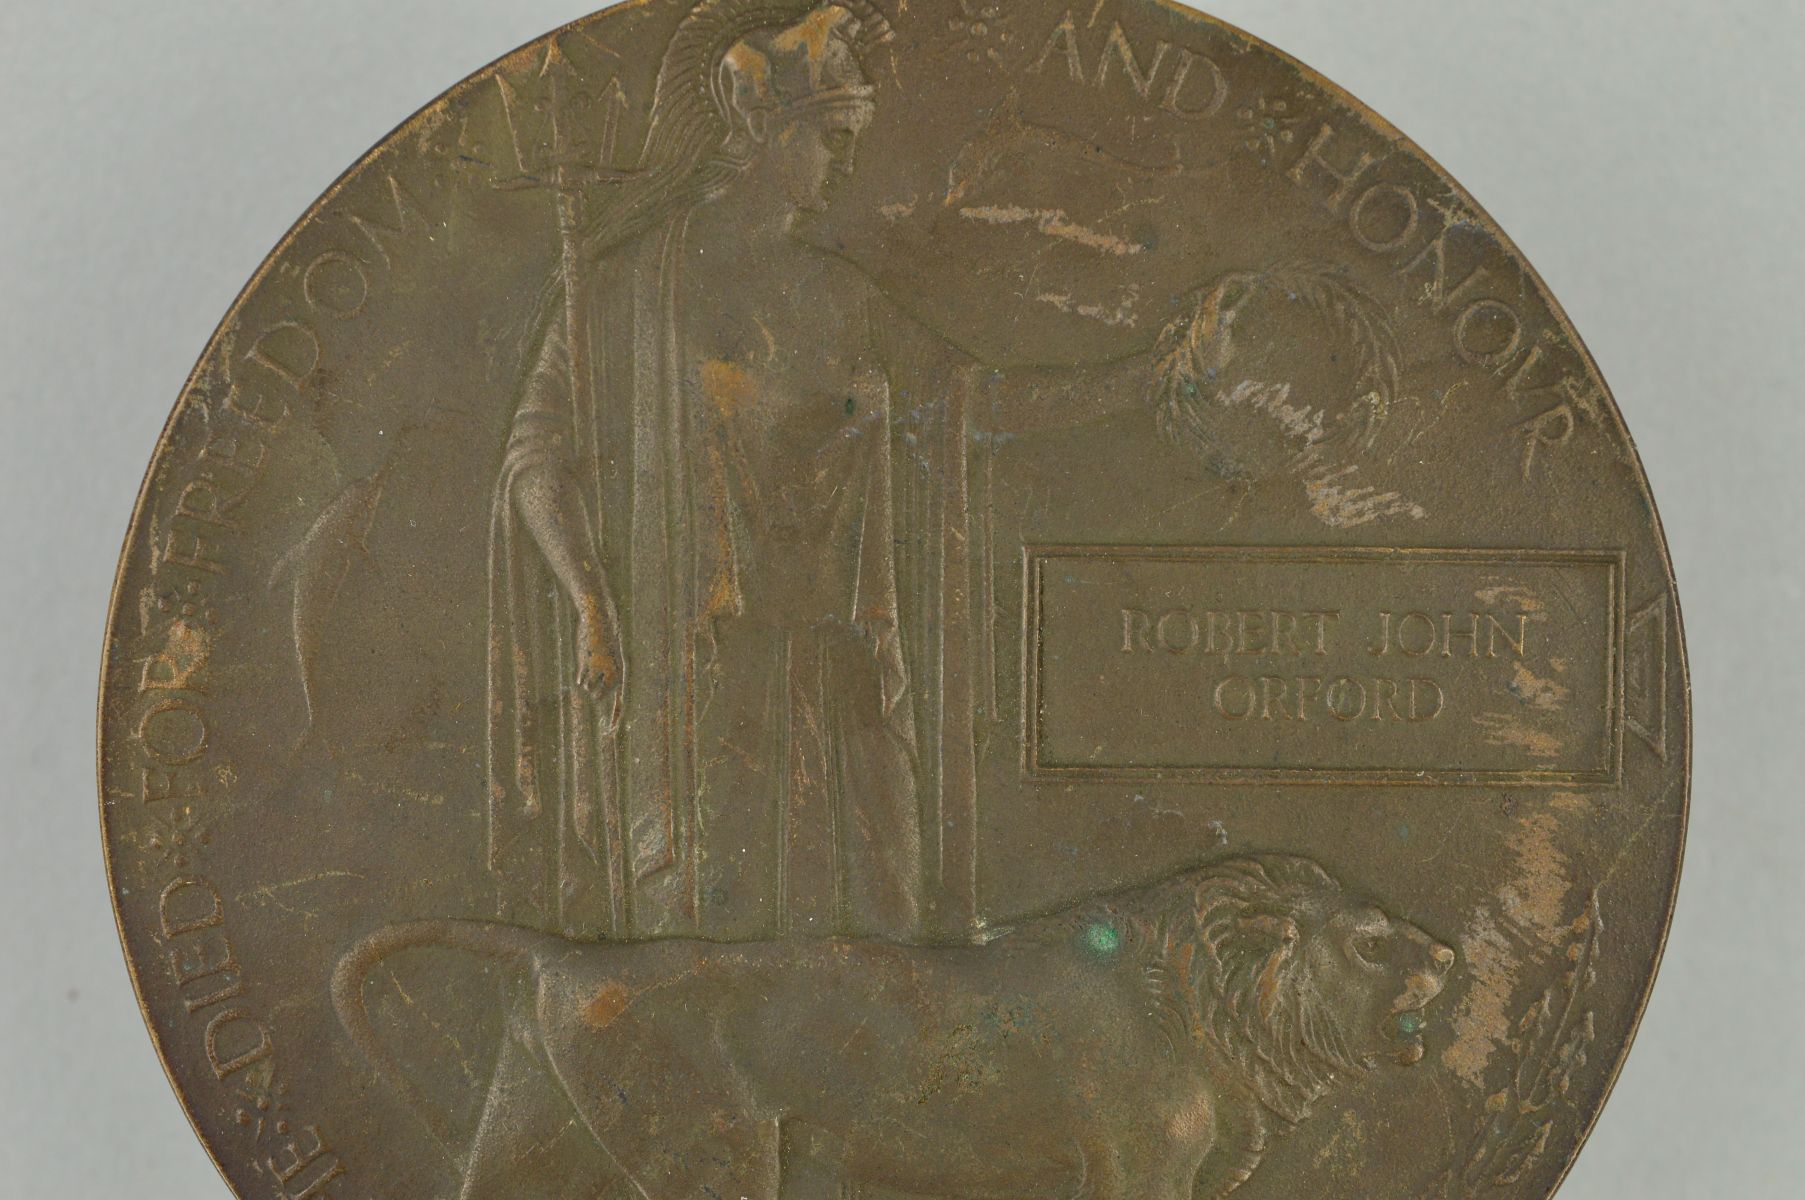 A WWI MEMORIAL DEATH PLAQUE, named to Robert John ORFORD, a check on the C.W.G.S. Reveals, Pte 959 - Image 4 of 4